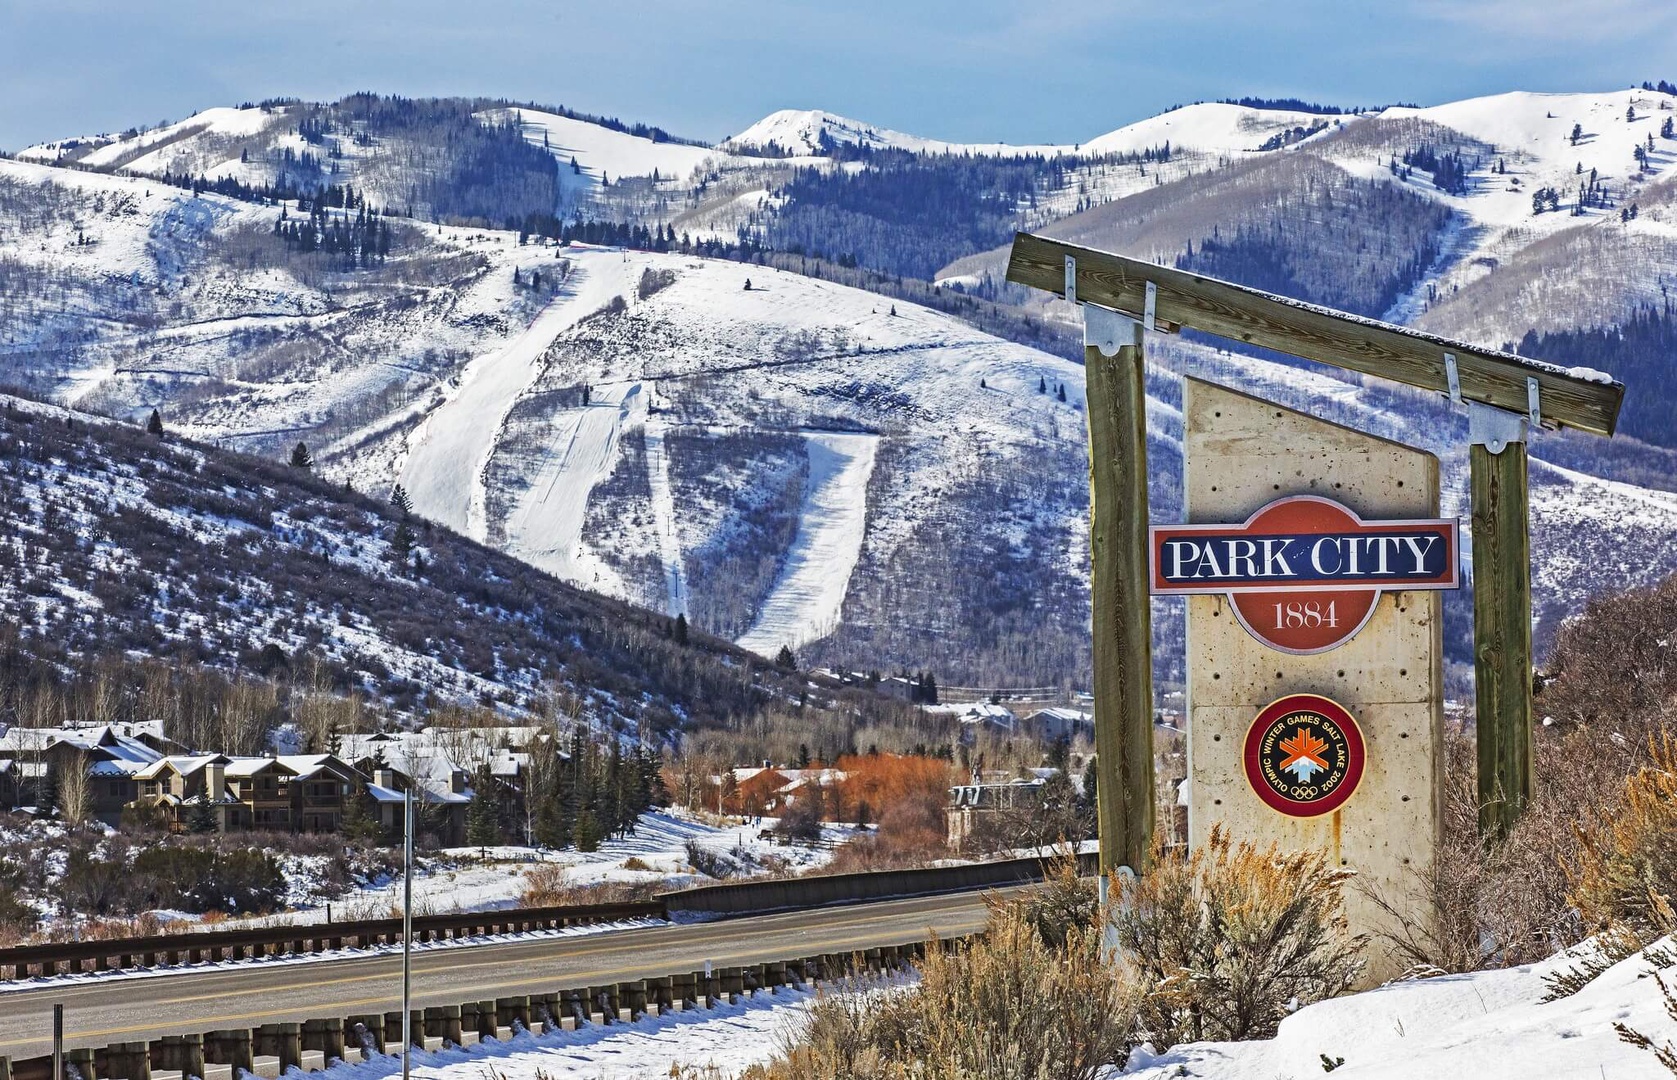 Welcome to Park City